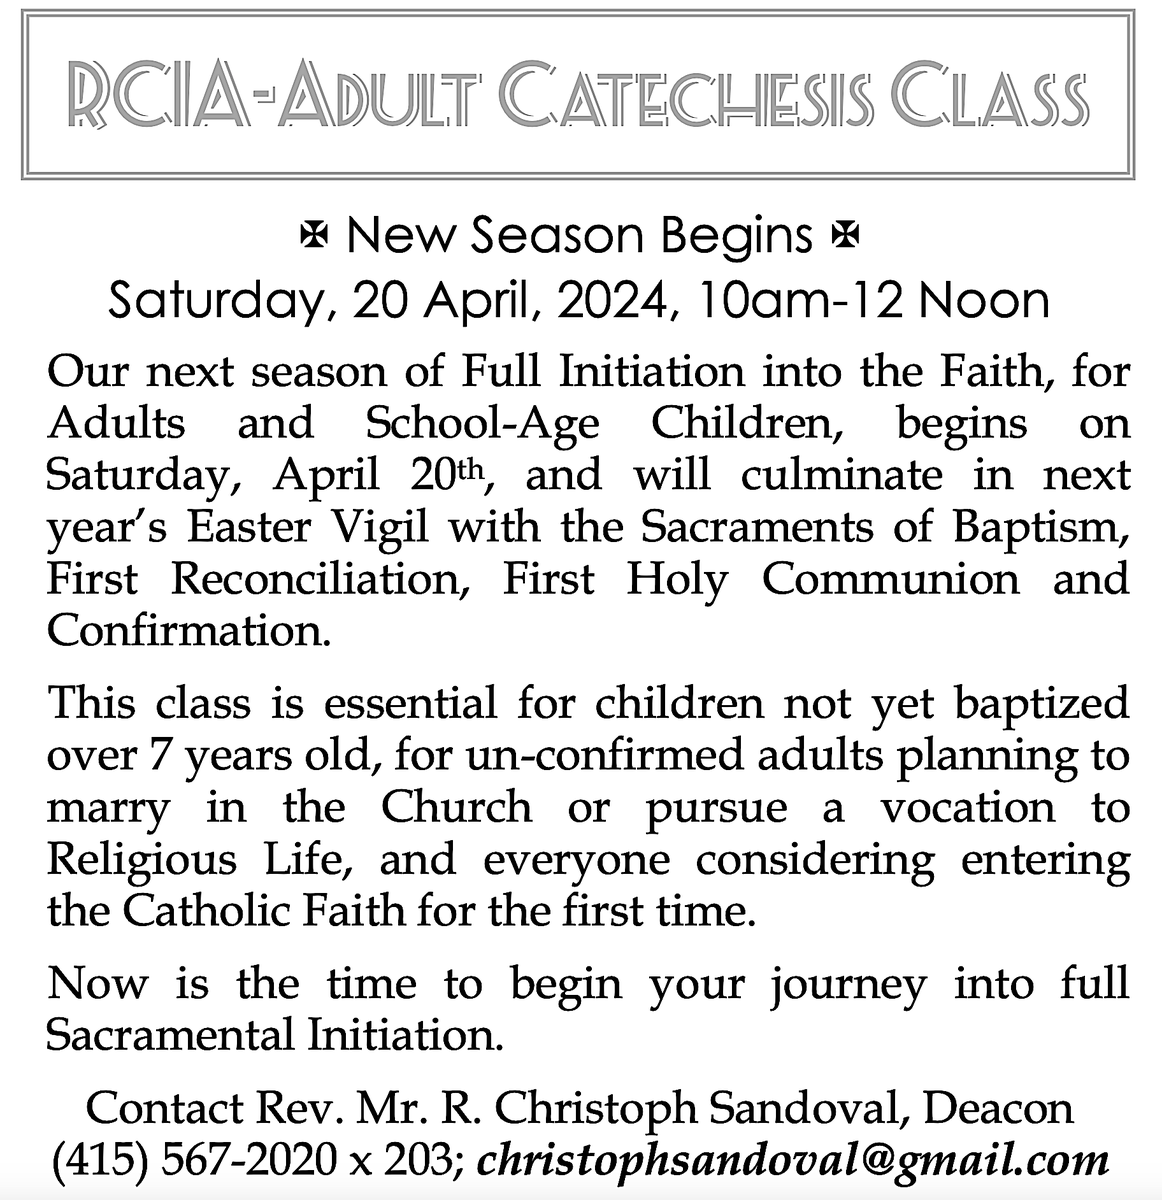 INVITATION TO RITE OF CHRISTIAN INITIATION FOR ADULTS (RCIA) AND CHILDREN'S CATECHESIS CLASS